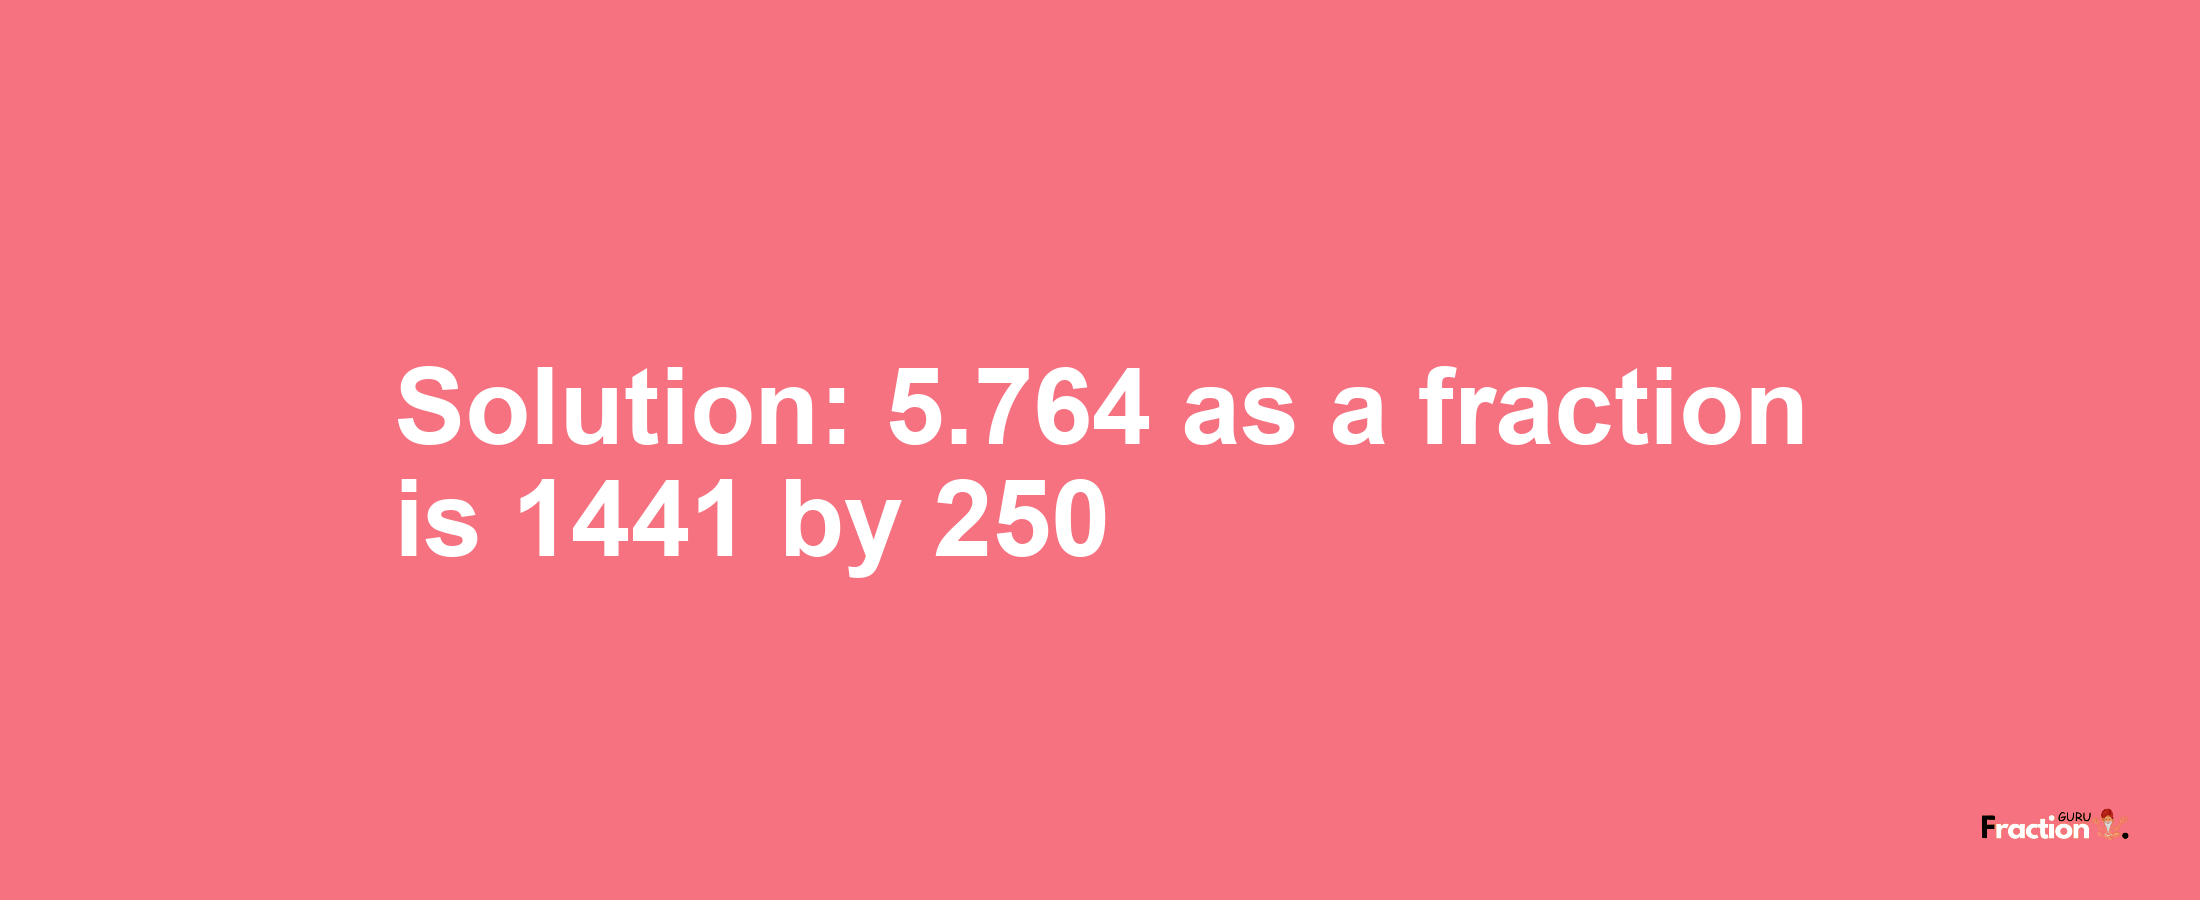 Solution:5.764 as a fraction is 1441/250